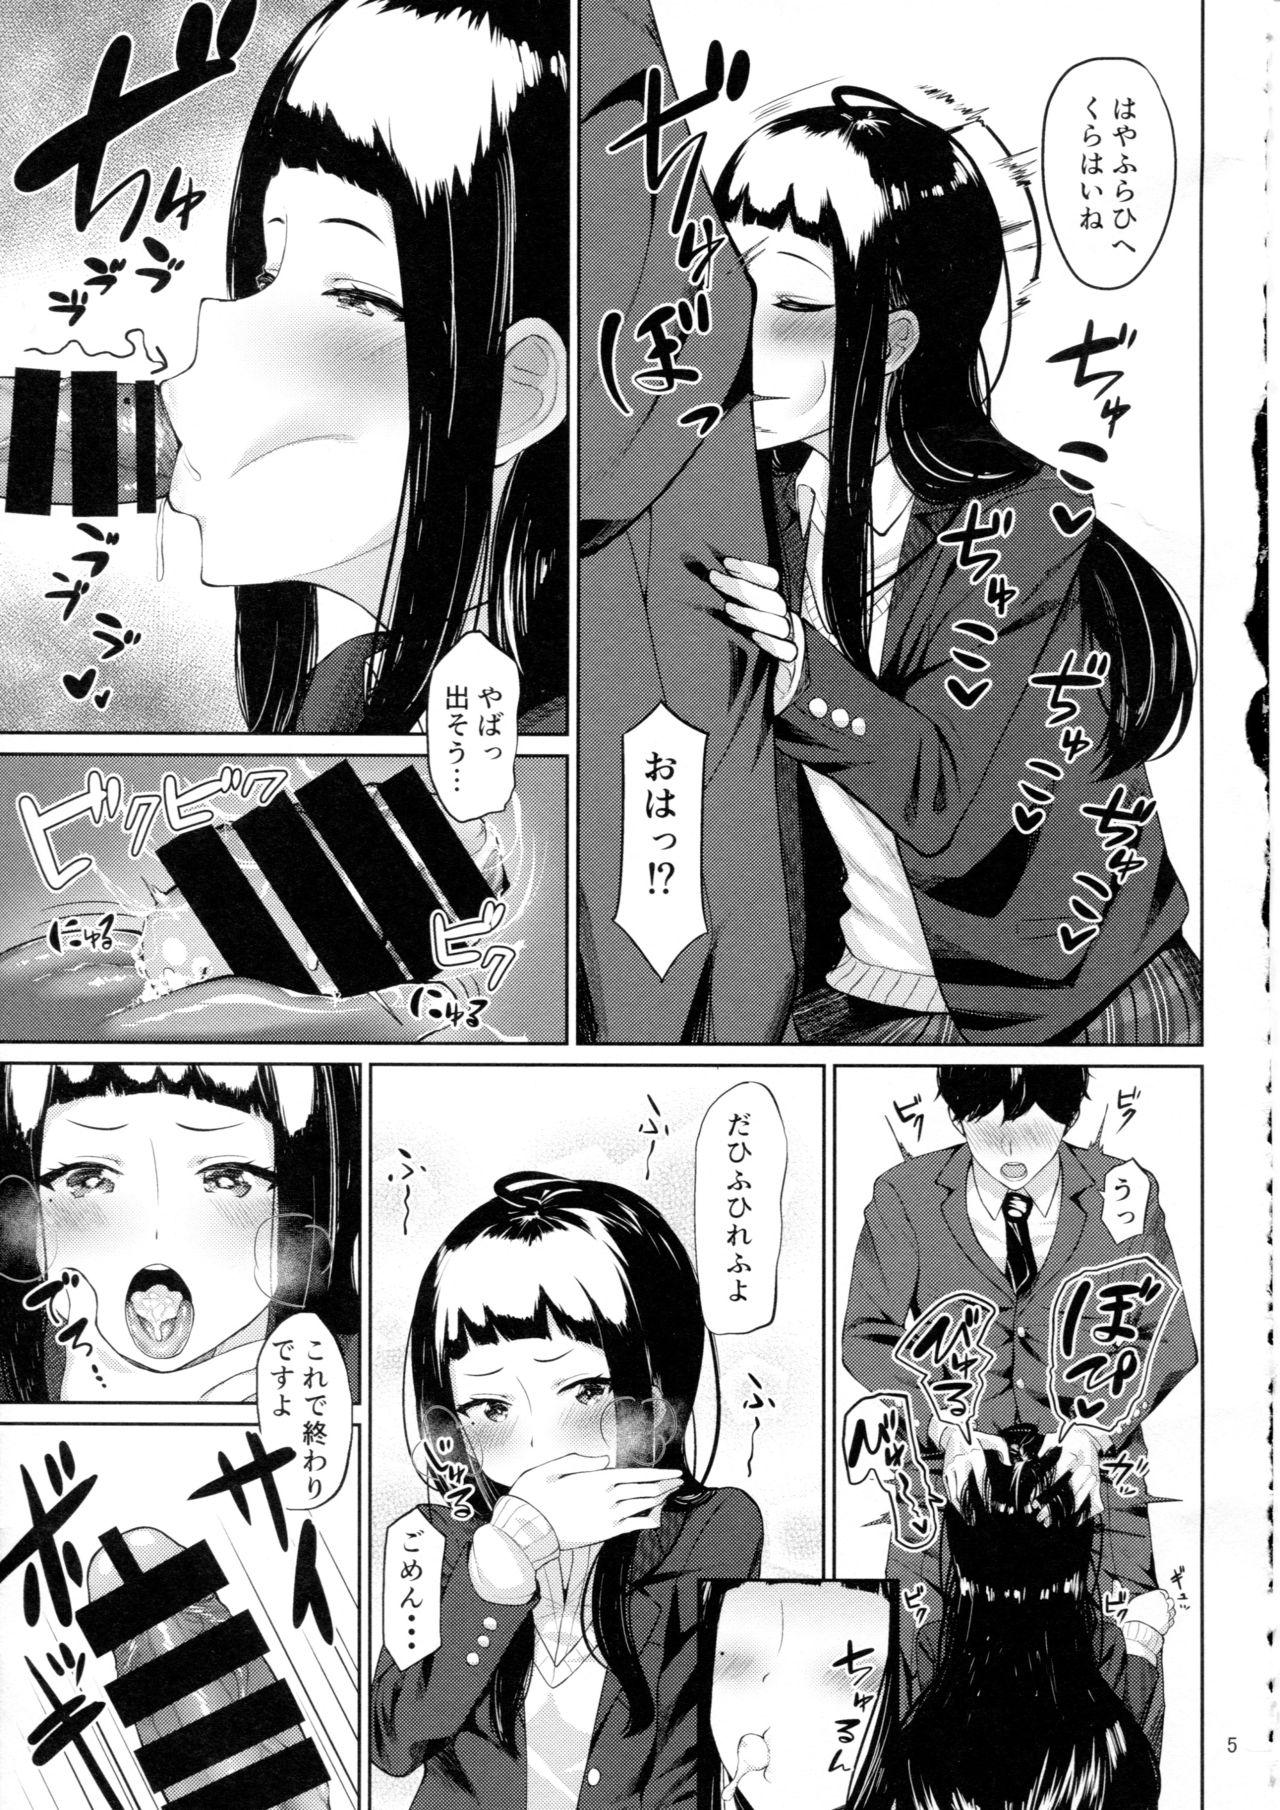 Gay Uniform D.EMOTION - Tokyo 7th sisters Girlfriend - Page 4